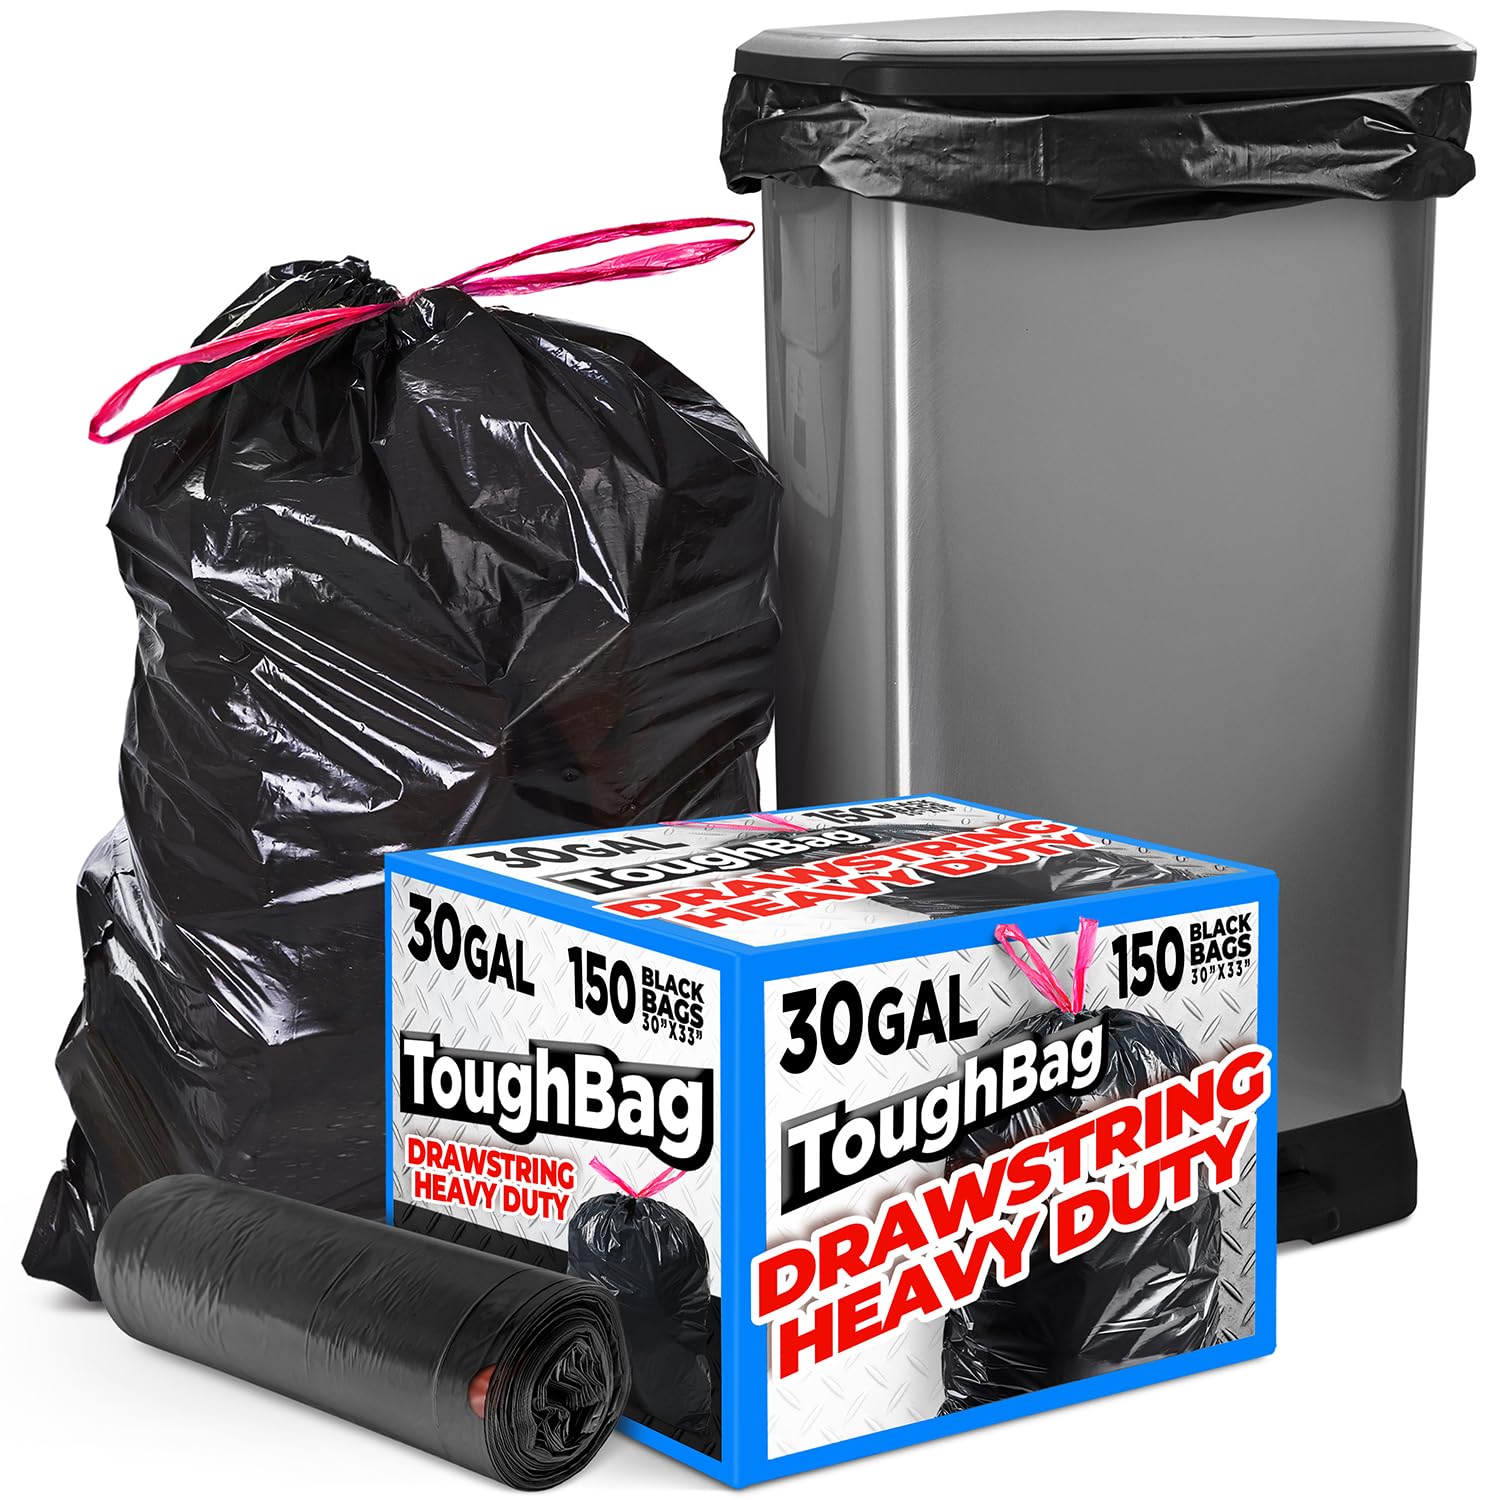 ToughBag 30 Gallon Trash Bags Drawstring (150 Count) Large Black Garbage Bags 30+ Gallon, Heavy Duty 30 Gallon Trash Bags for Kitchen, Commercial & Lawn